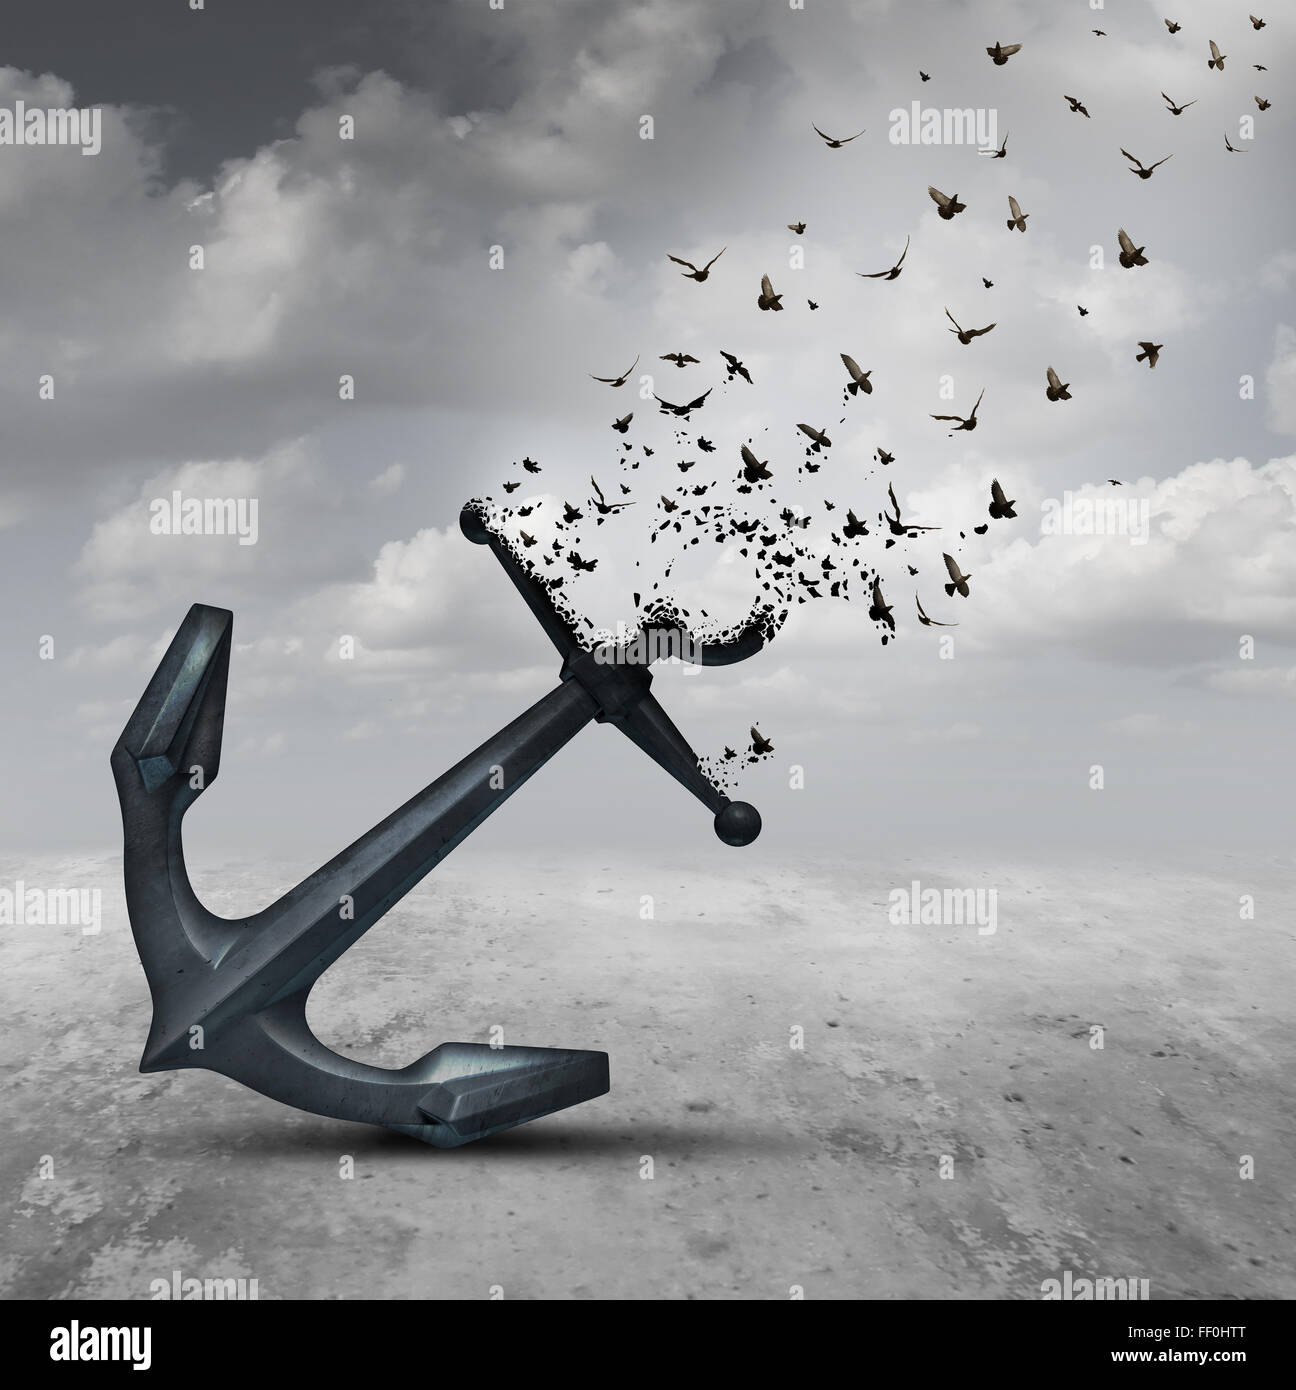 Letting go psychology concept as a heavy anchor transforming into a flying group of birds as a motivational metaphor for liberation and leaving a life or business burden behind. Stock Photo